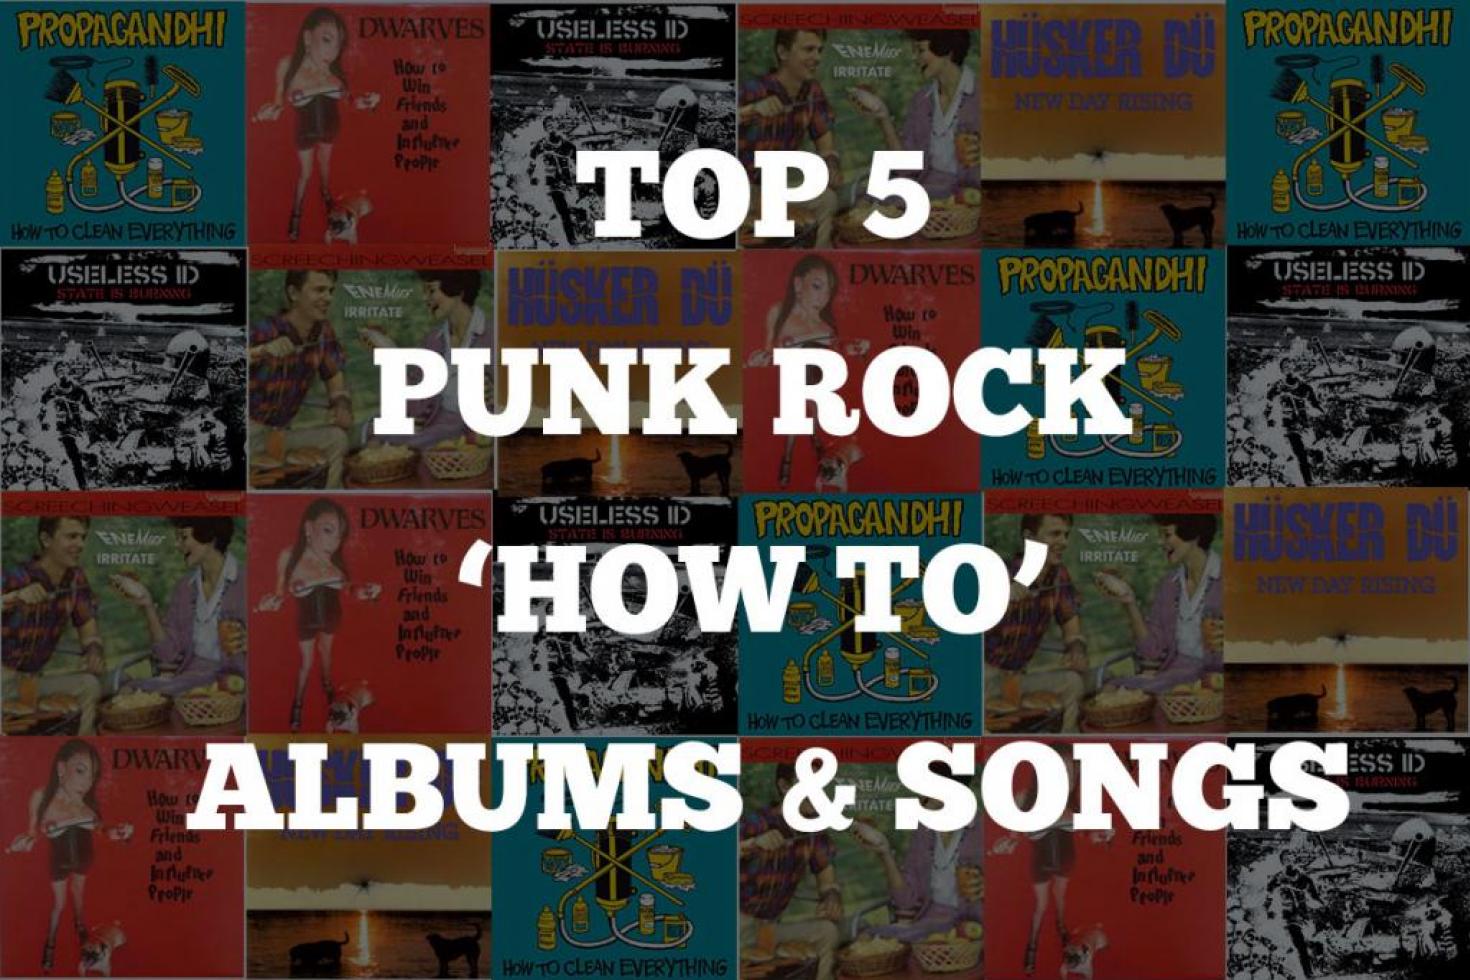 Top 5 punk rock ‘How to’ albums & songs